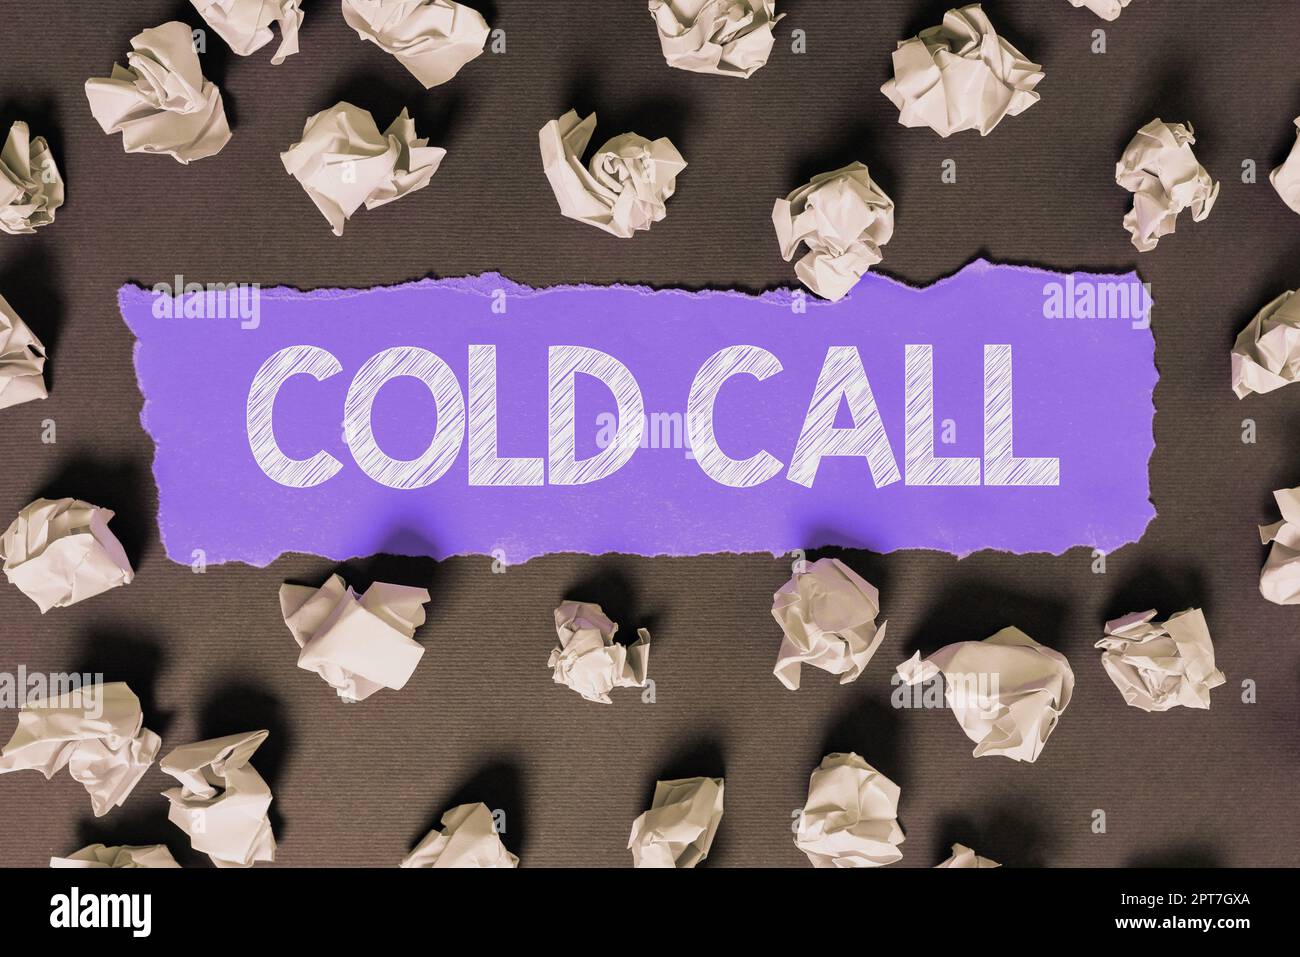 Text sign showing Cold Call, Concept meaning Unsolicited call made by someone trying to sell goods or services Stock Photo